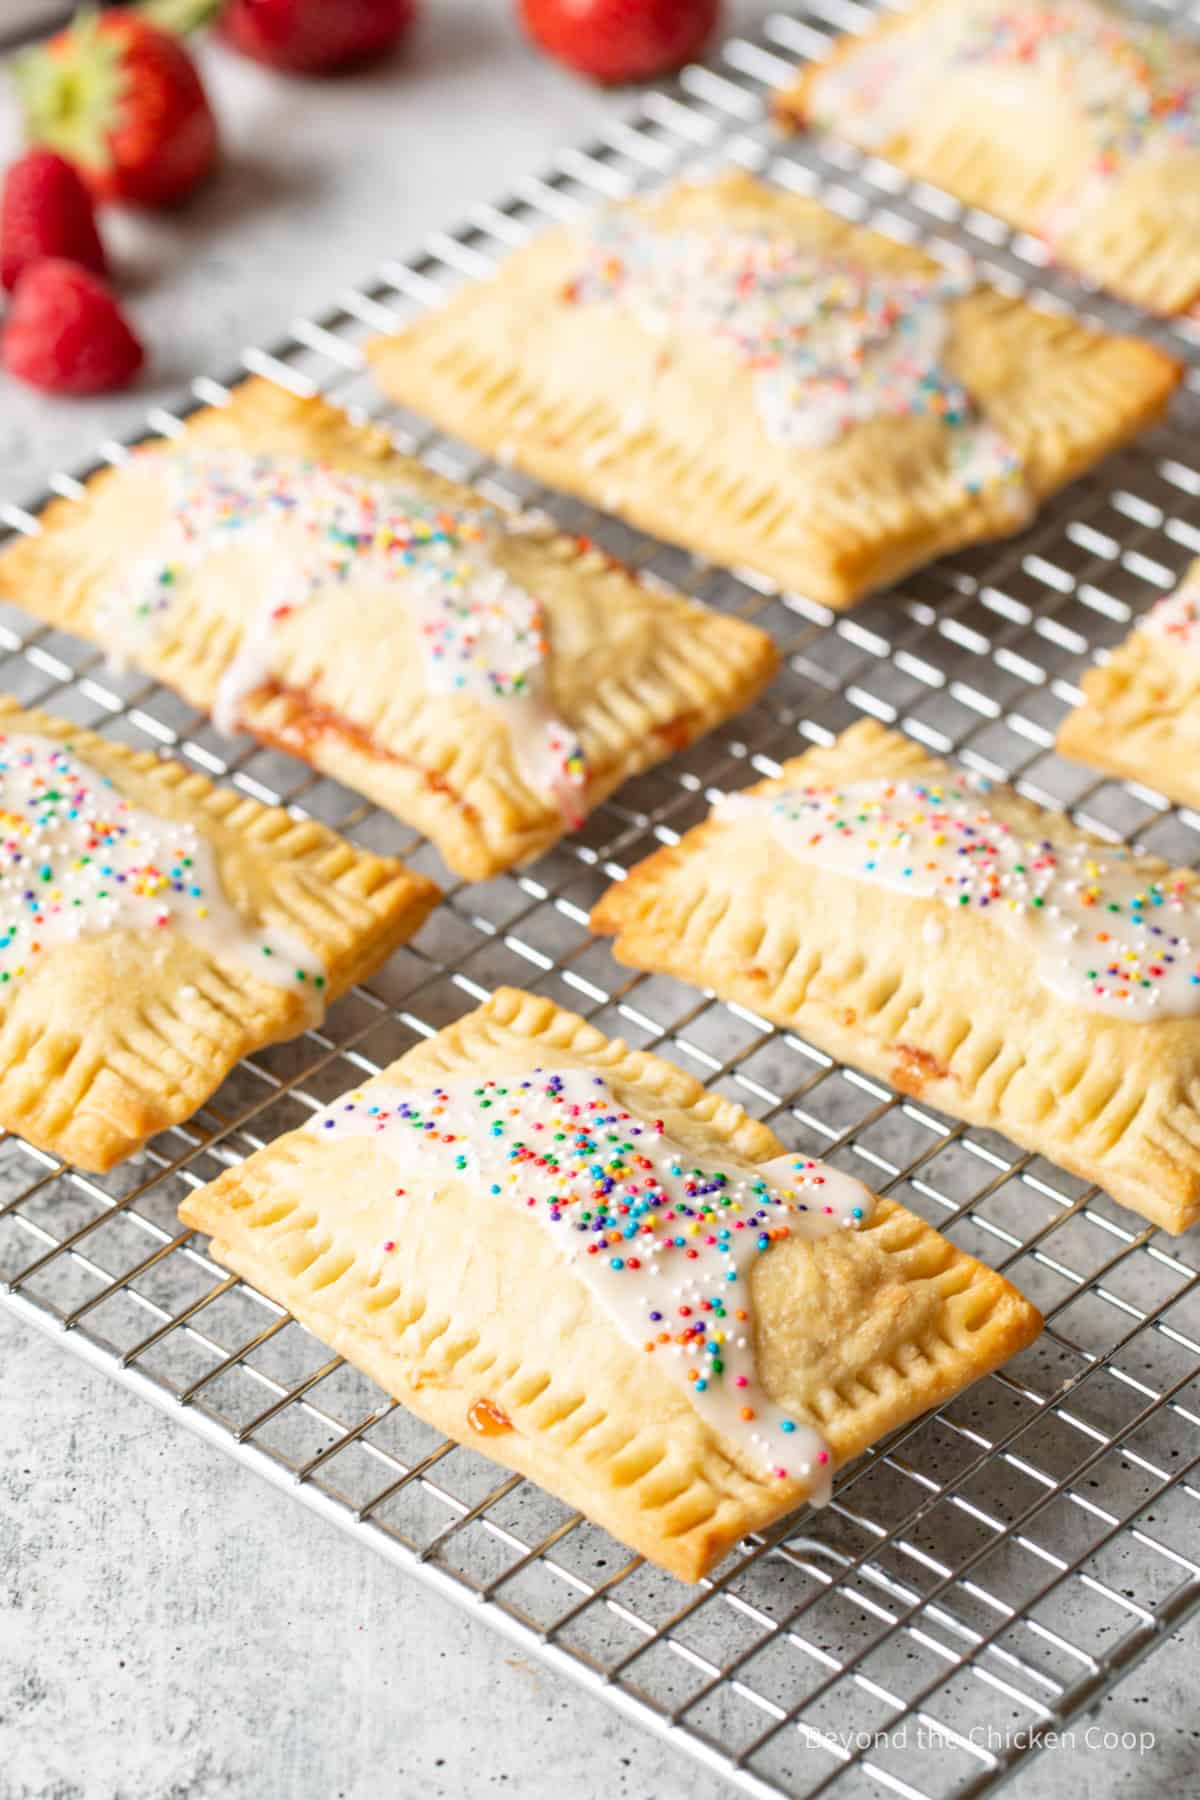 Pop tarts with colored sprinkles on a baking rack.